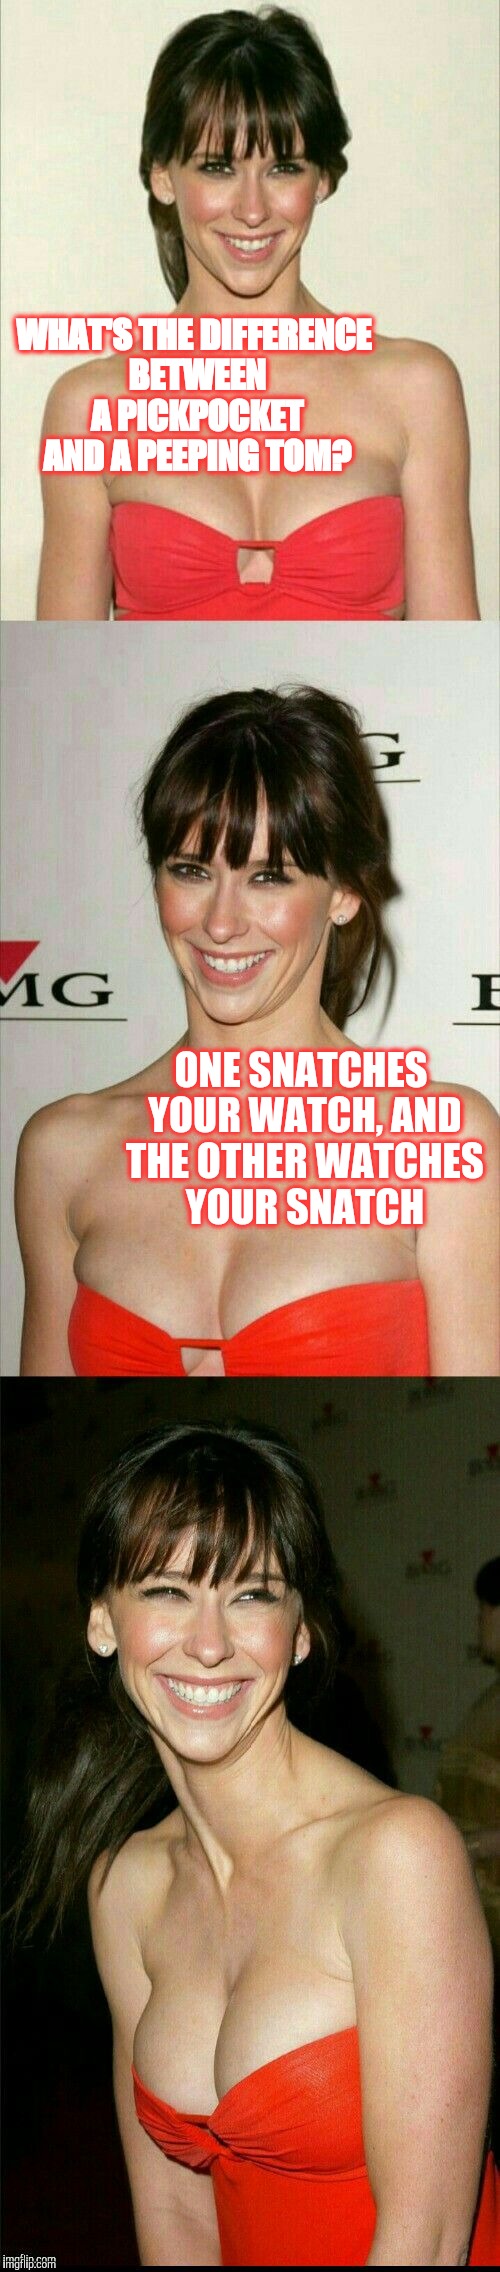 I'd love to watch her snatch | WHAT'S THE DIFFERENCE BETWEEN A PICKPOCKET AND A PEEPING TOM? ONE SNATCHES YOUR WATCH, AND THE OTHER WATCHES YOUR SNATCH | image tagged in jennifer love hewitt joke template,jennifer love hewitt,jbmemegeek,bad puns | made w/ Imgflip meme maker